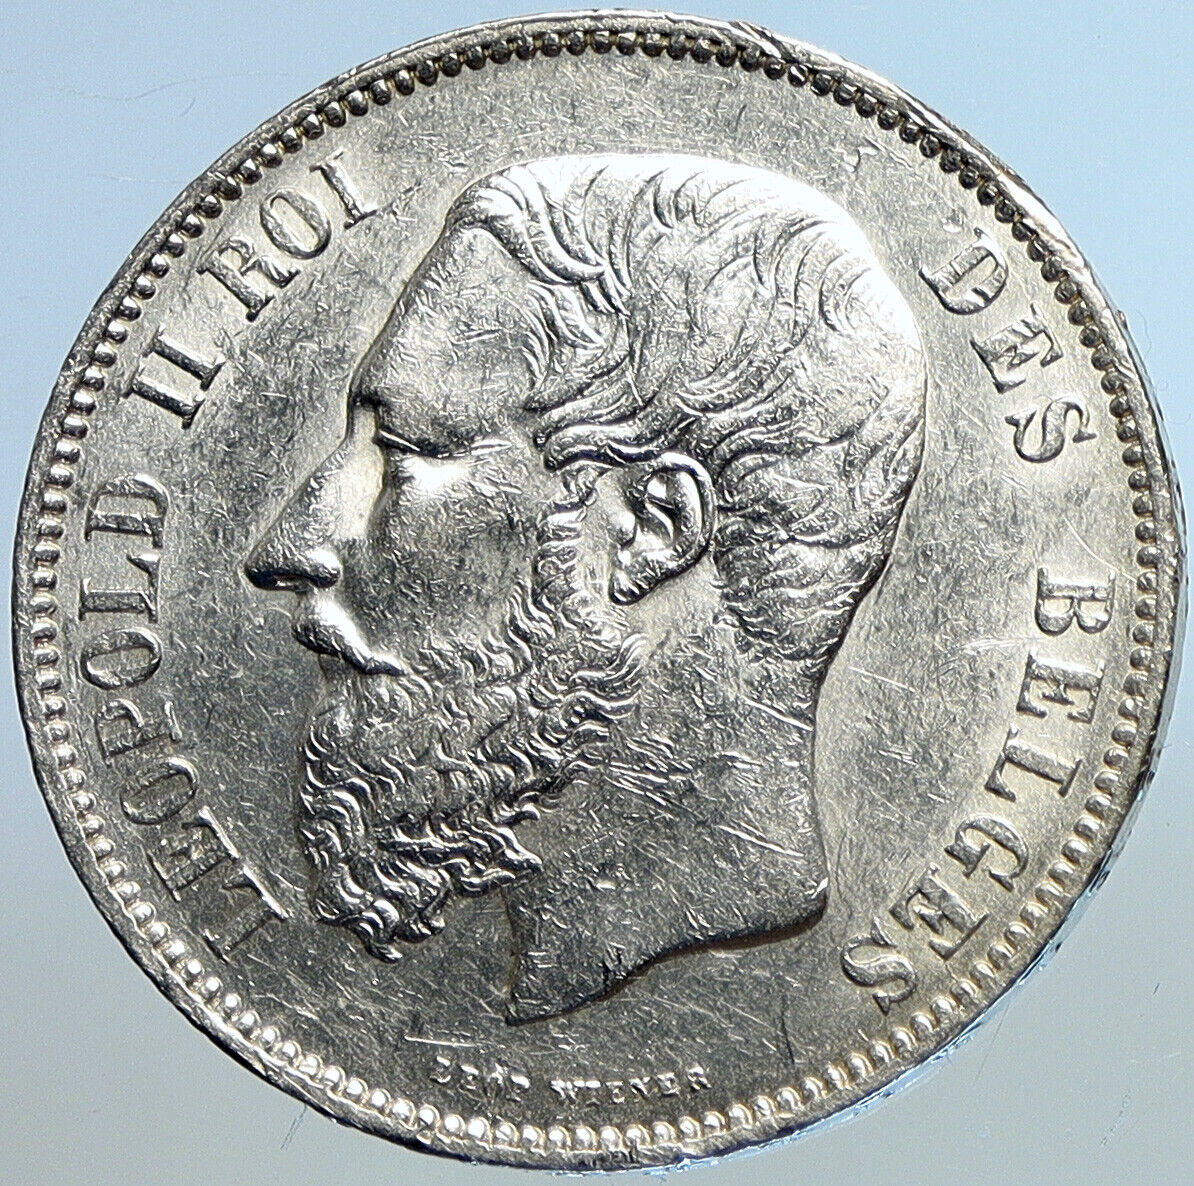 1874 BELGIUM with King LEOPOLD II and LION Genuine Silver 5 Francs Coin i113282